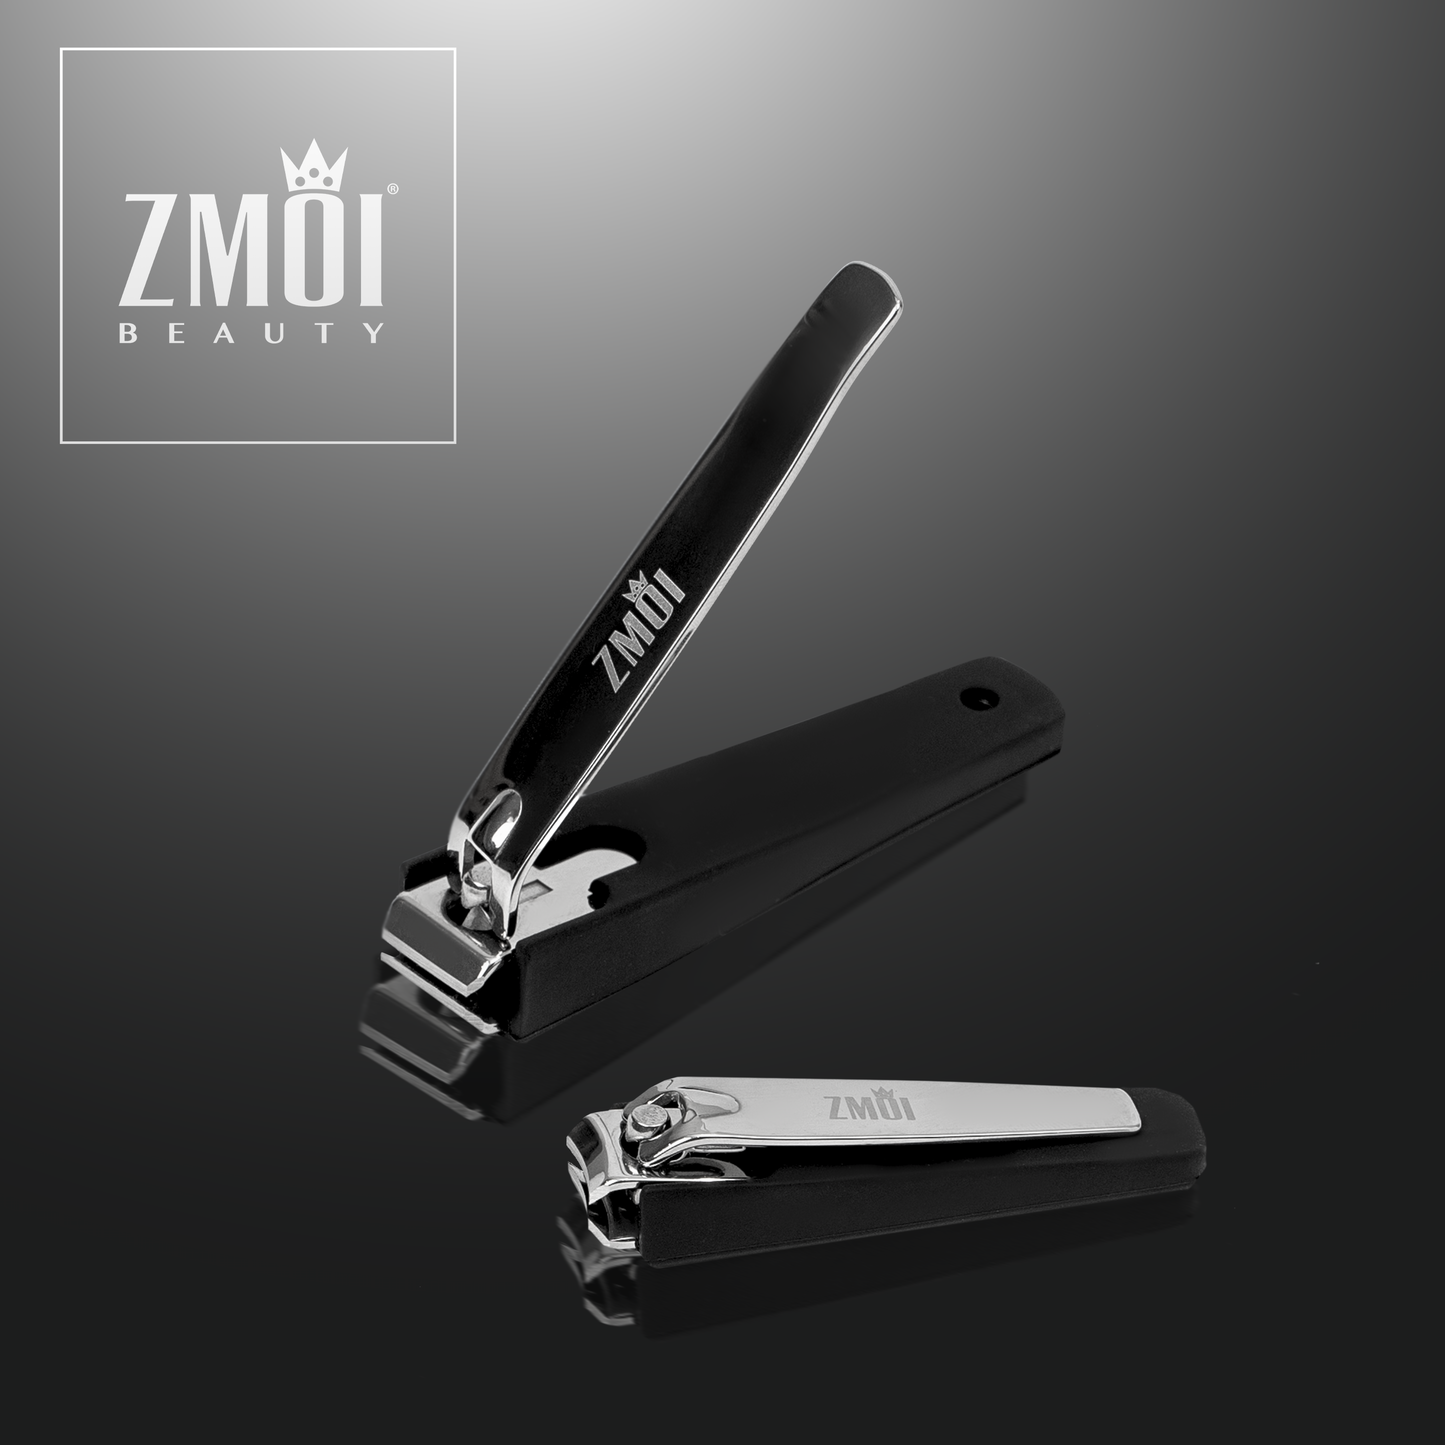 Nail Clippers Set – Practical Nail Clippers with Catcher